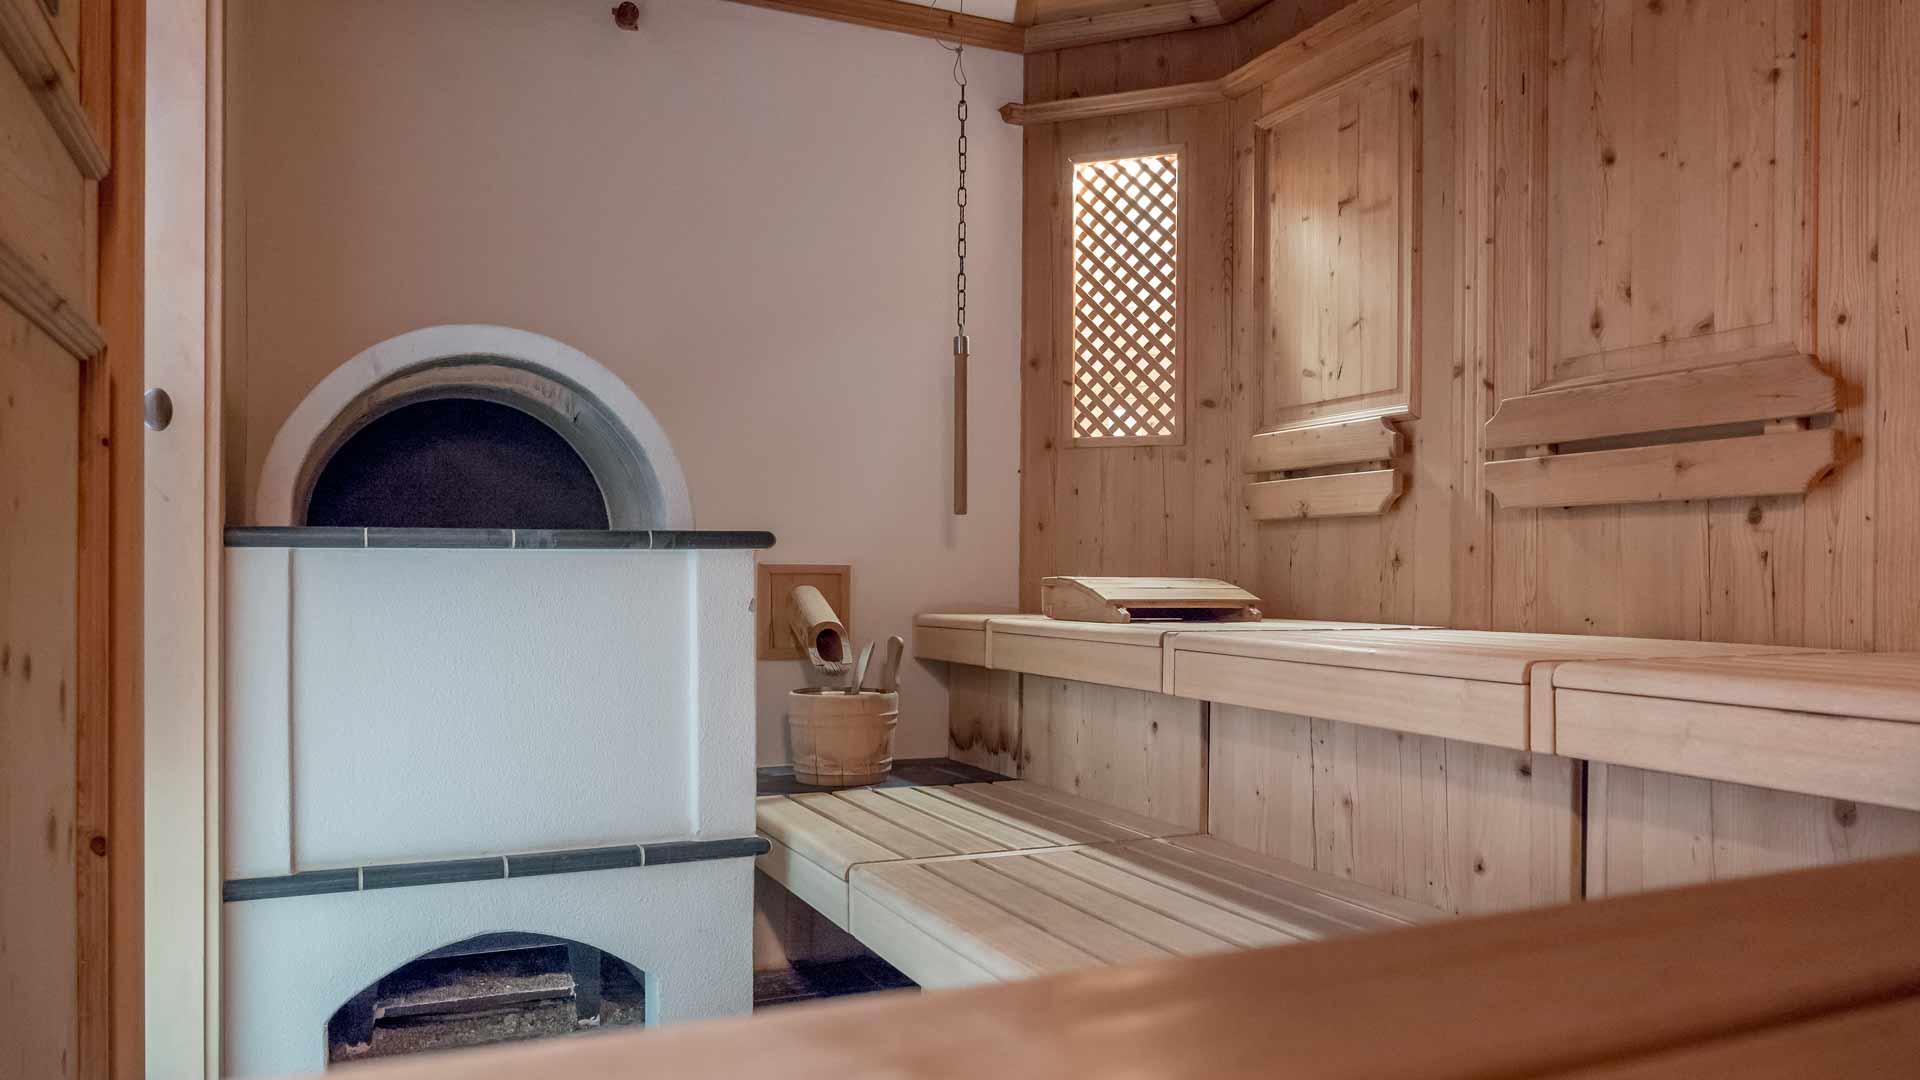 Enjoy 5 different saunas to rafine your skiing day